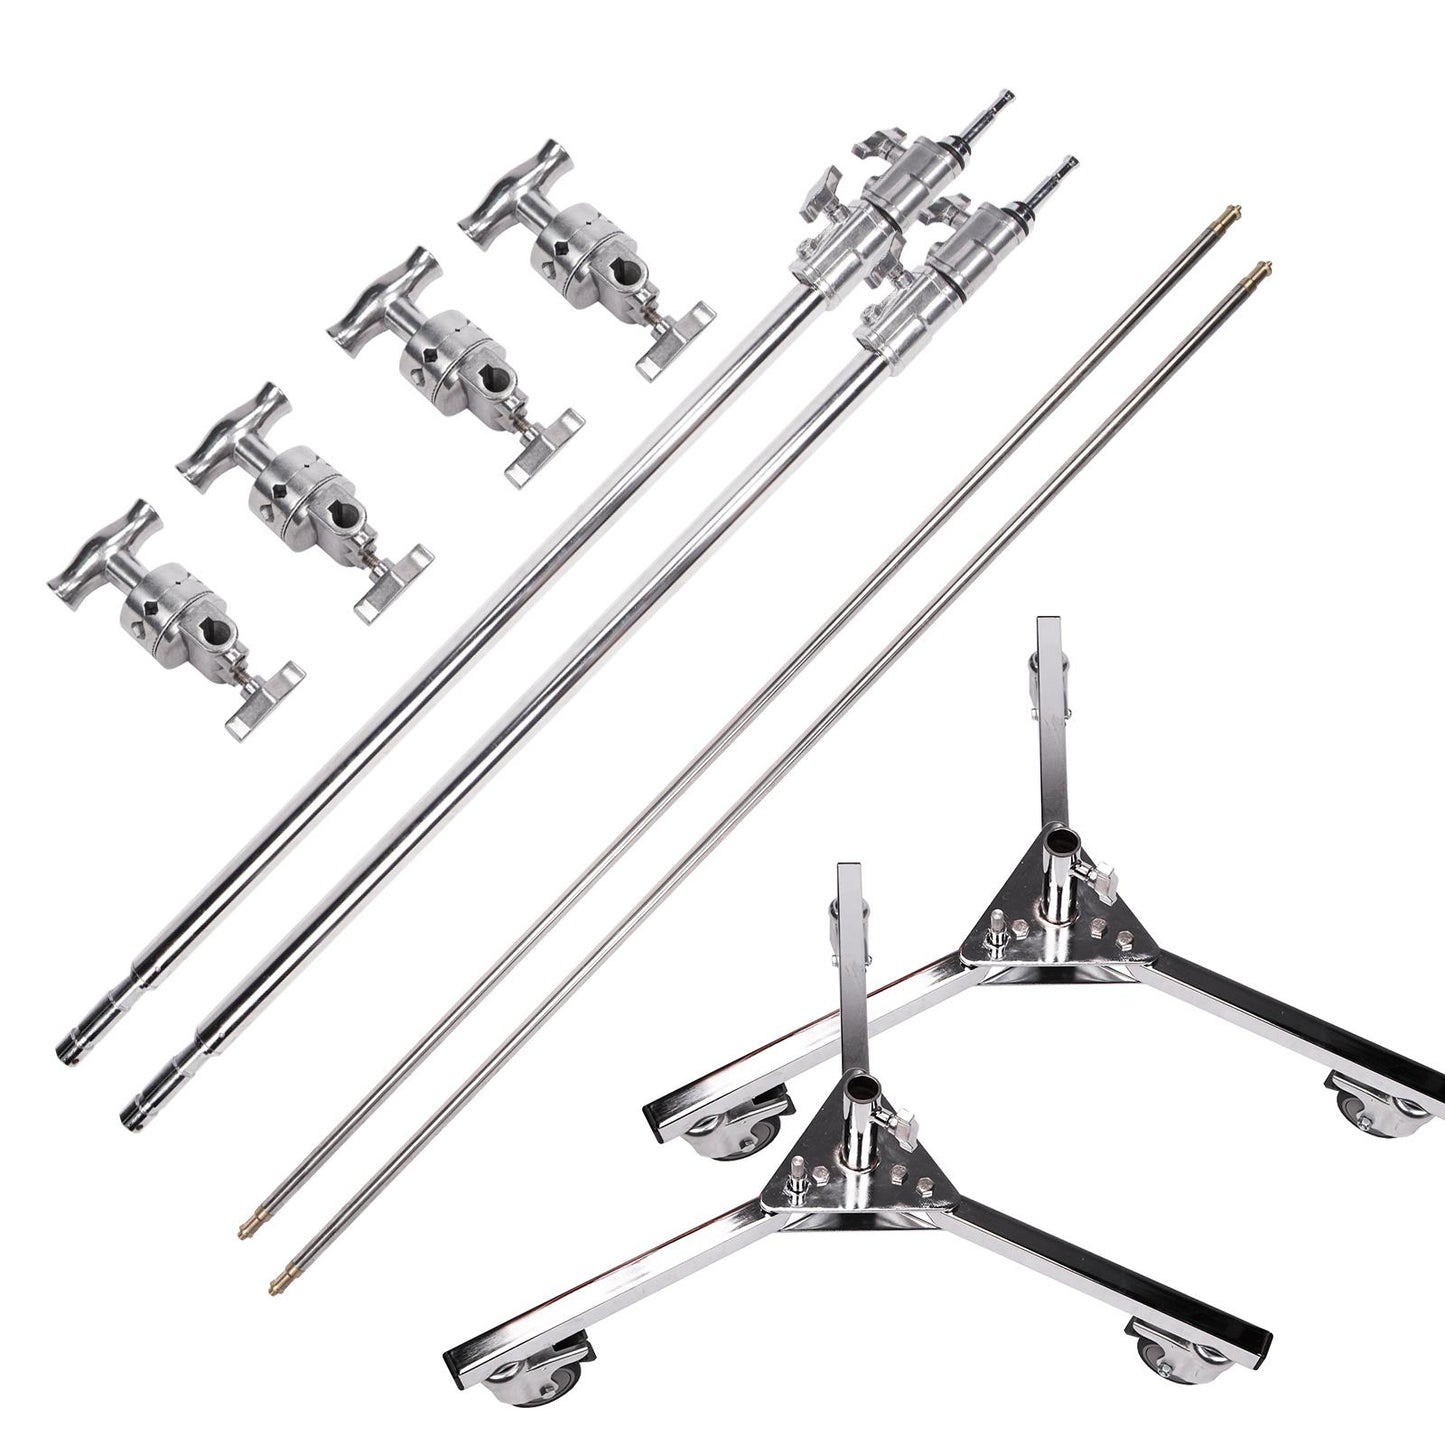 2 x Super Heavy Duty C Stand Kit, 307cm/ 120.8" Stainless Steel Light Stand Rod Solid 127cm/ 50" Boom Arm Grip Head Kit with Castor Wheels Rollers for Photography Studio Reflector and Other Equipment